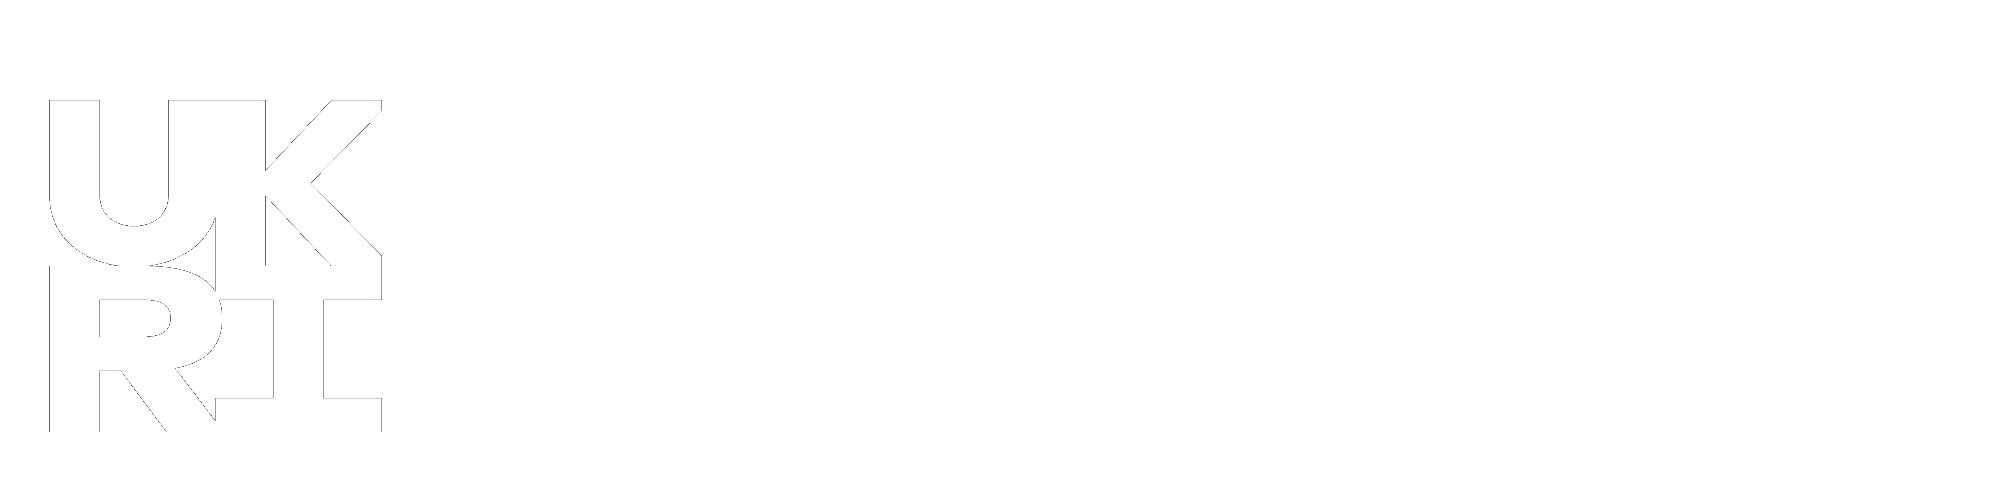 Biotechnology and Biological Sciences Research Council